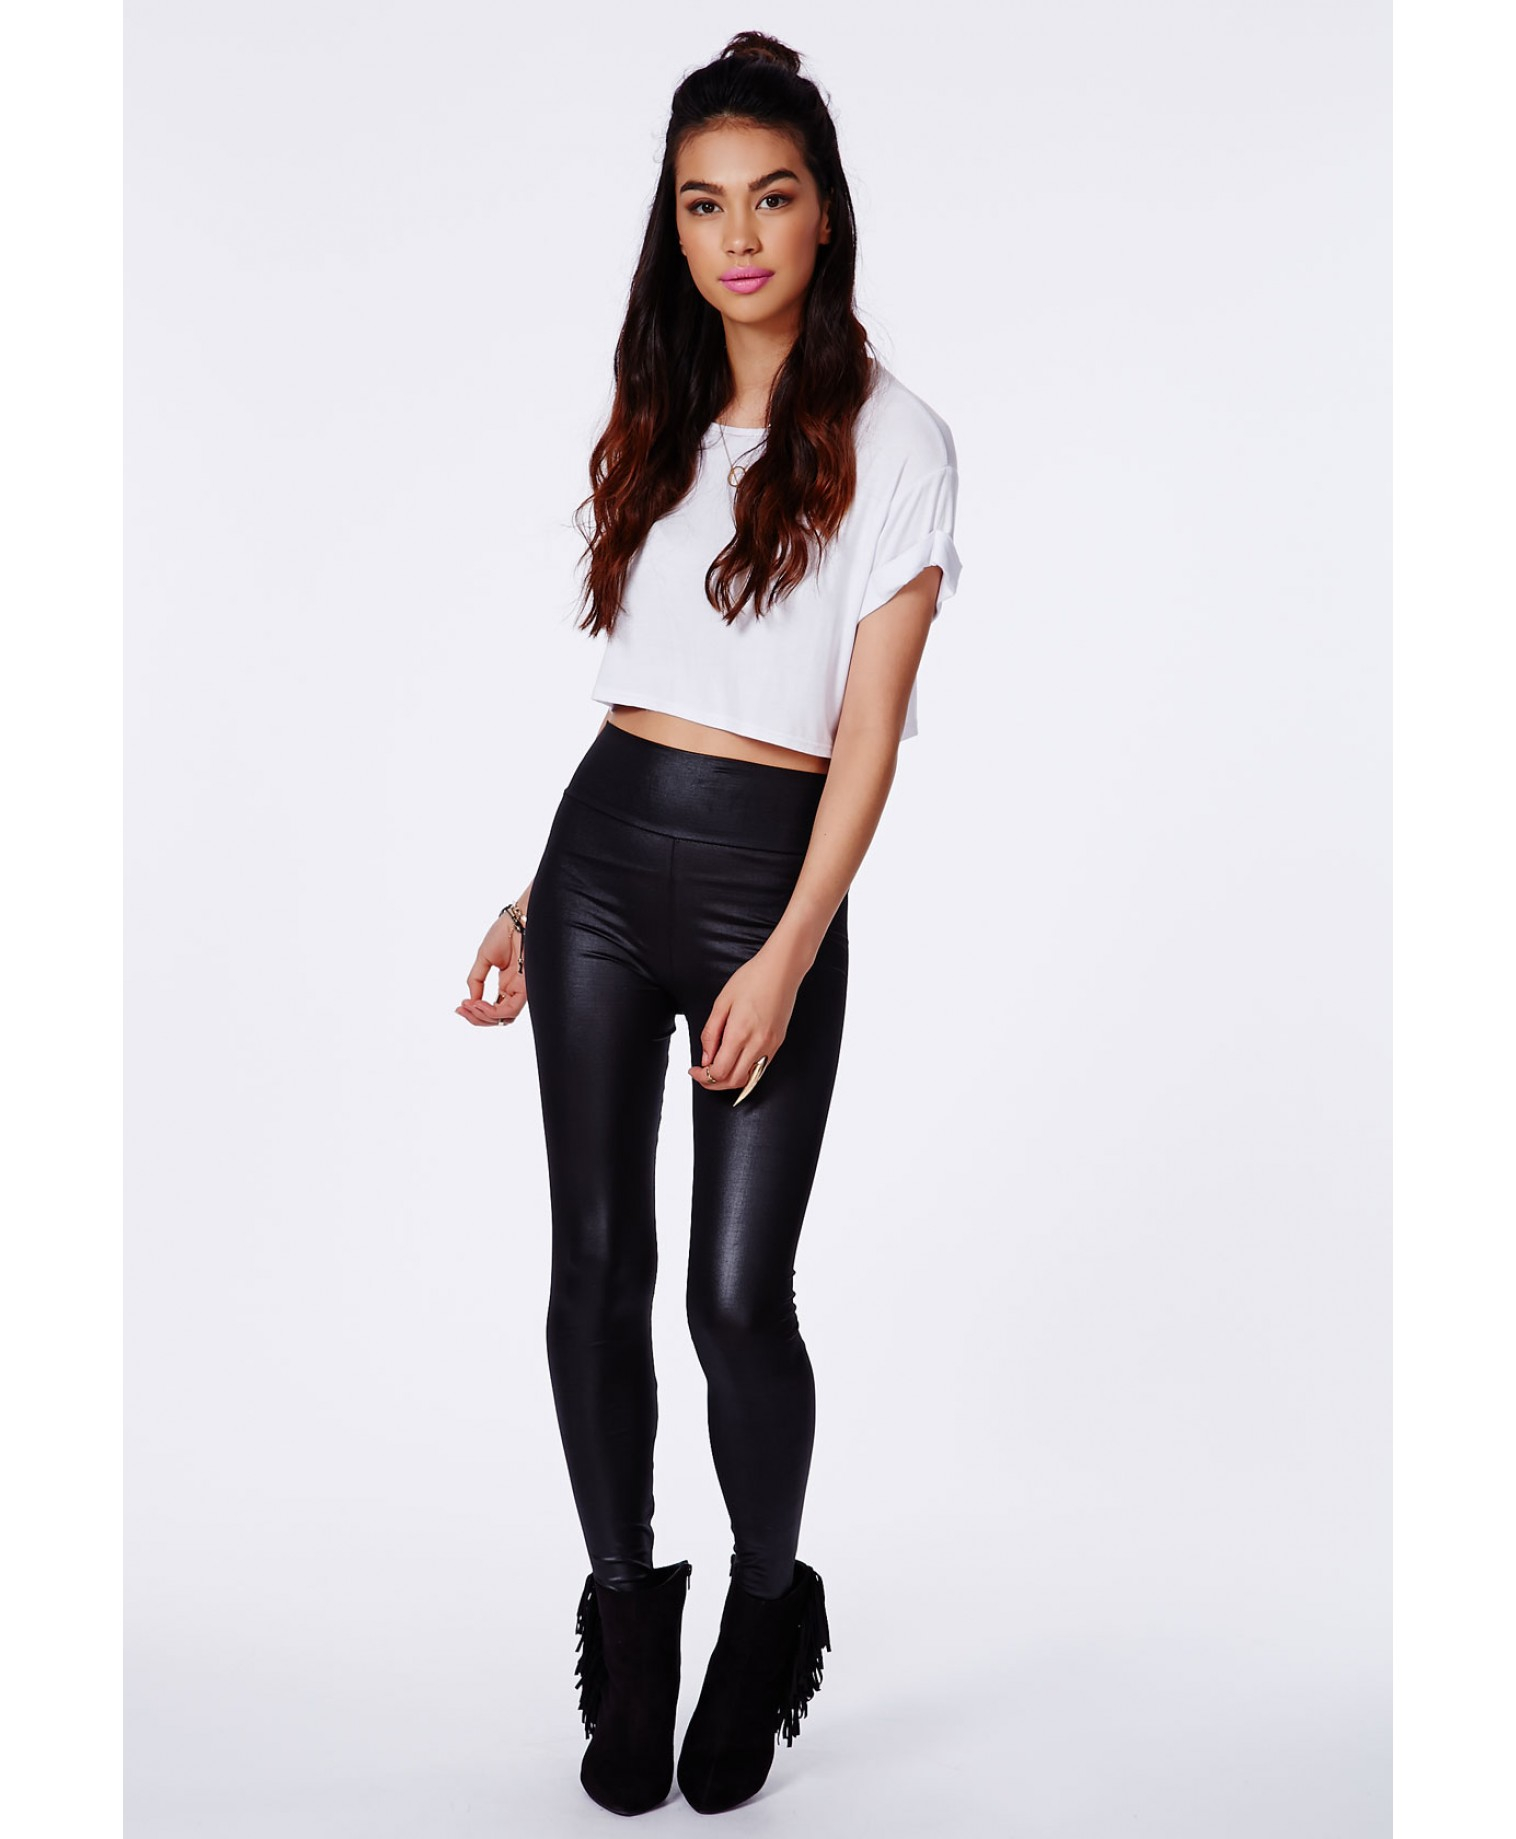 Lyst - Missguided Tabala High Waisted Shiny Leggings in Black